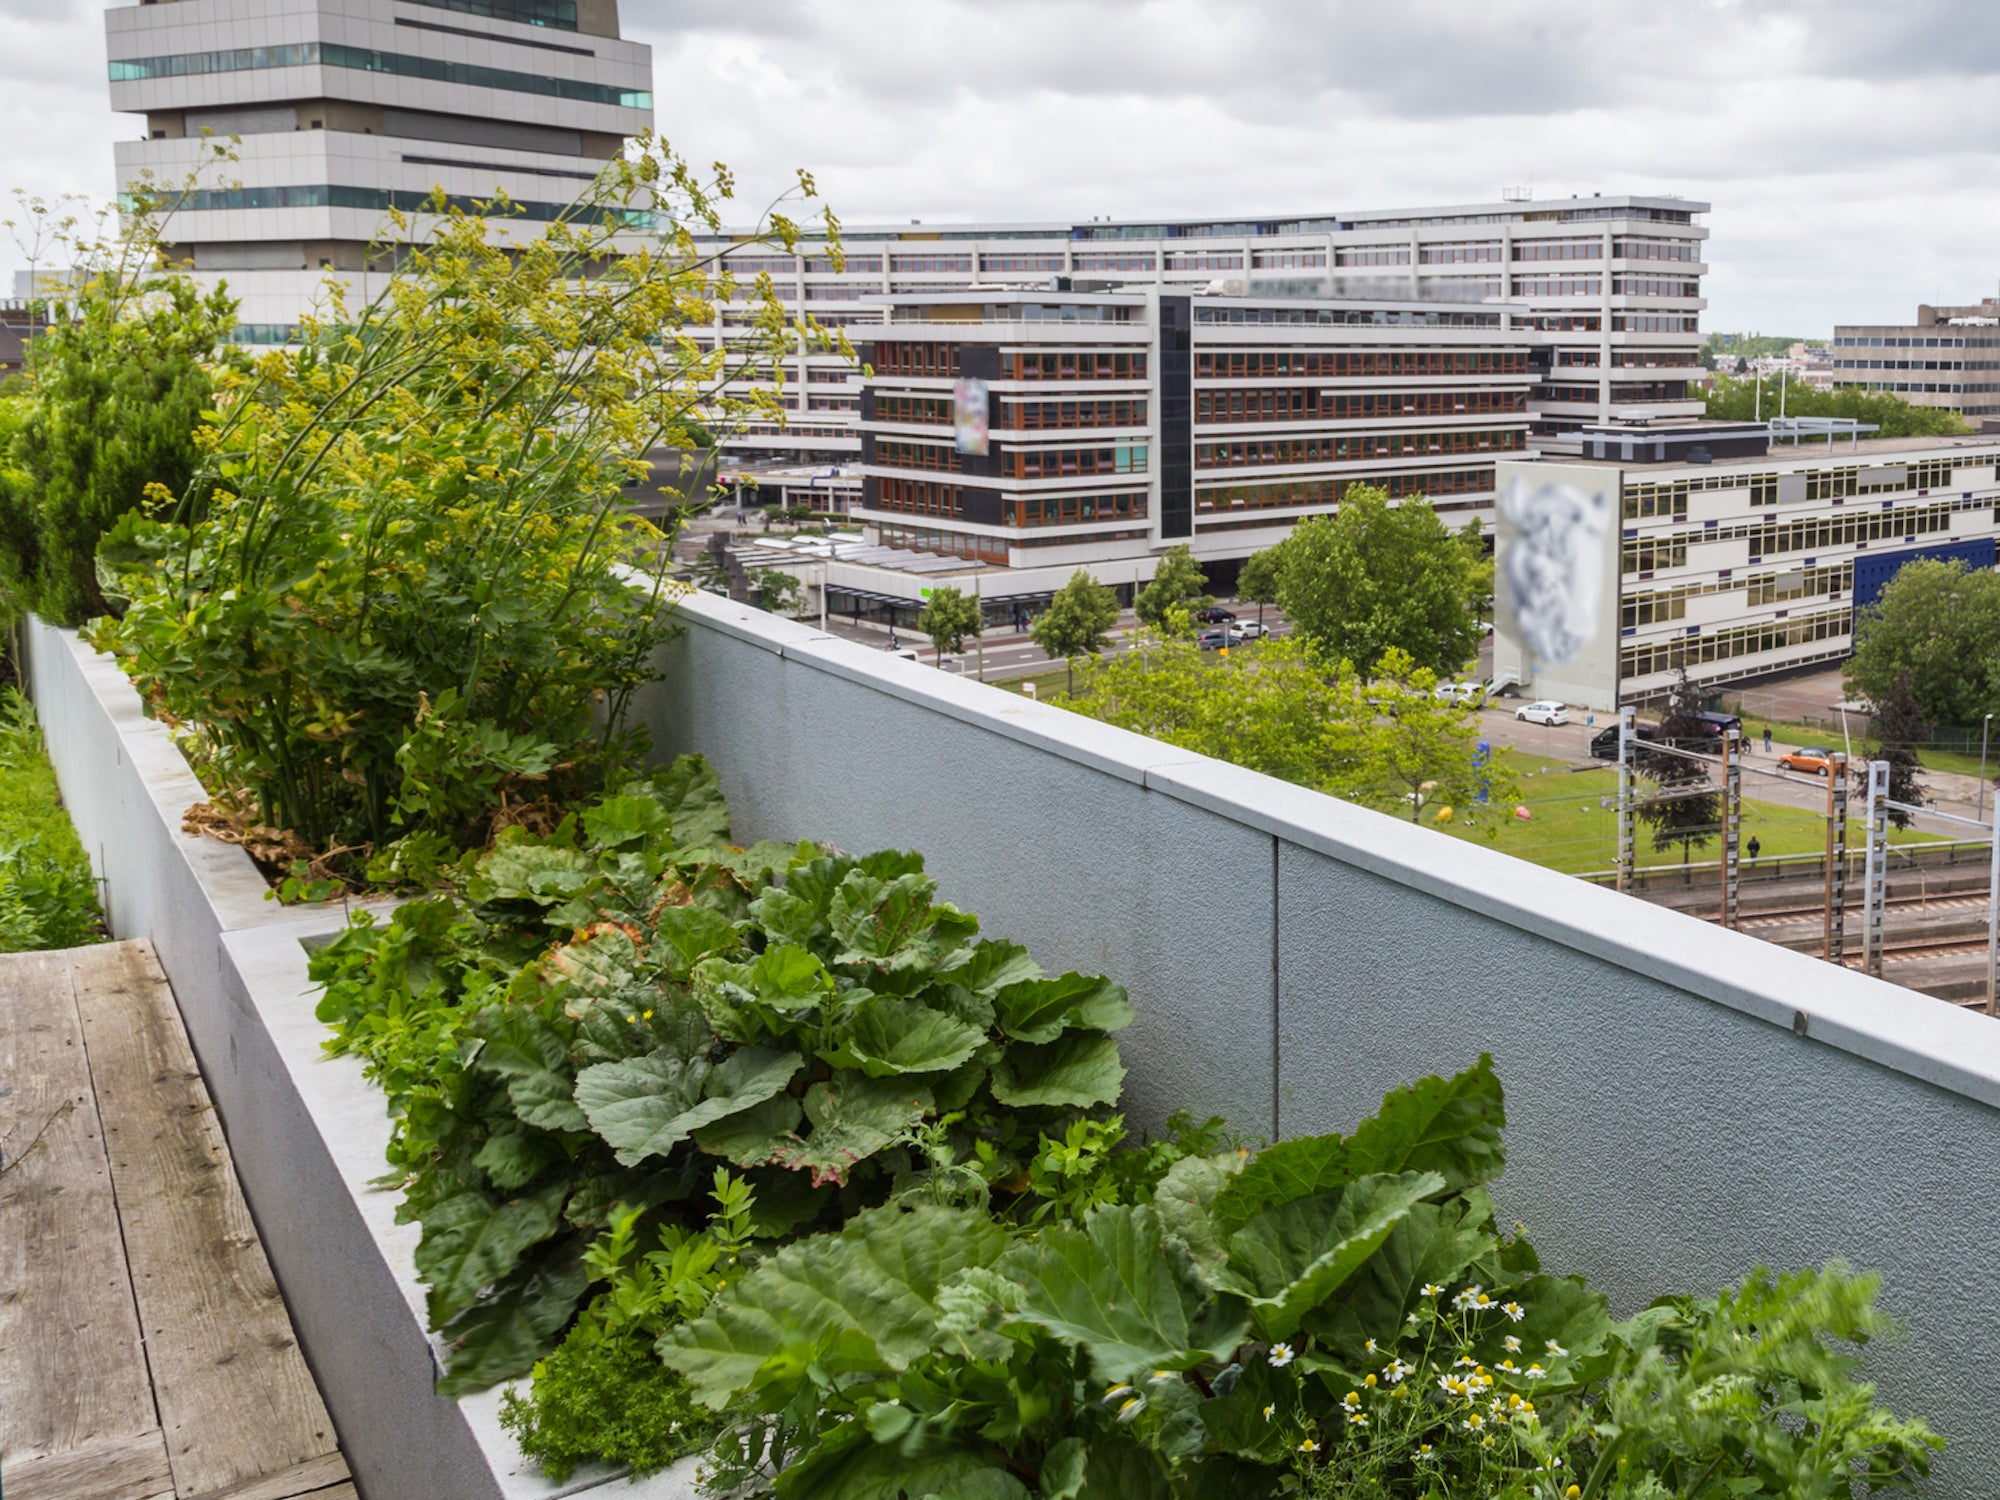 Pumping carbon dioxide waste to rooftop gardens boosts crop yields